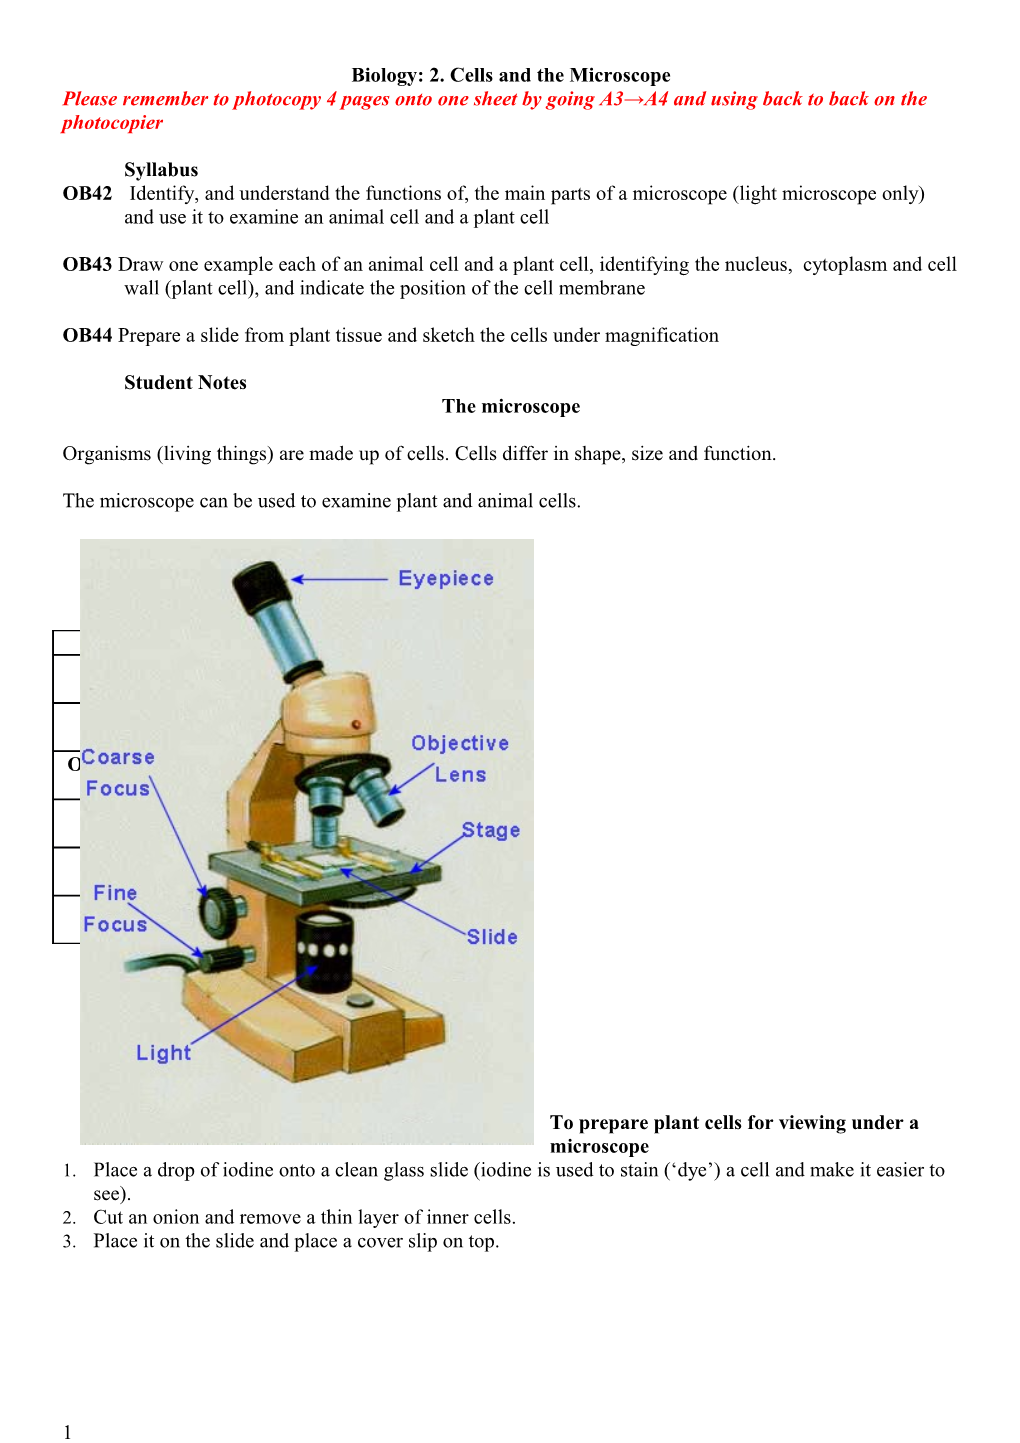 Biology: 2. Cells and the Microscope